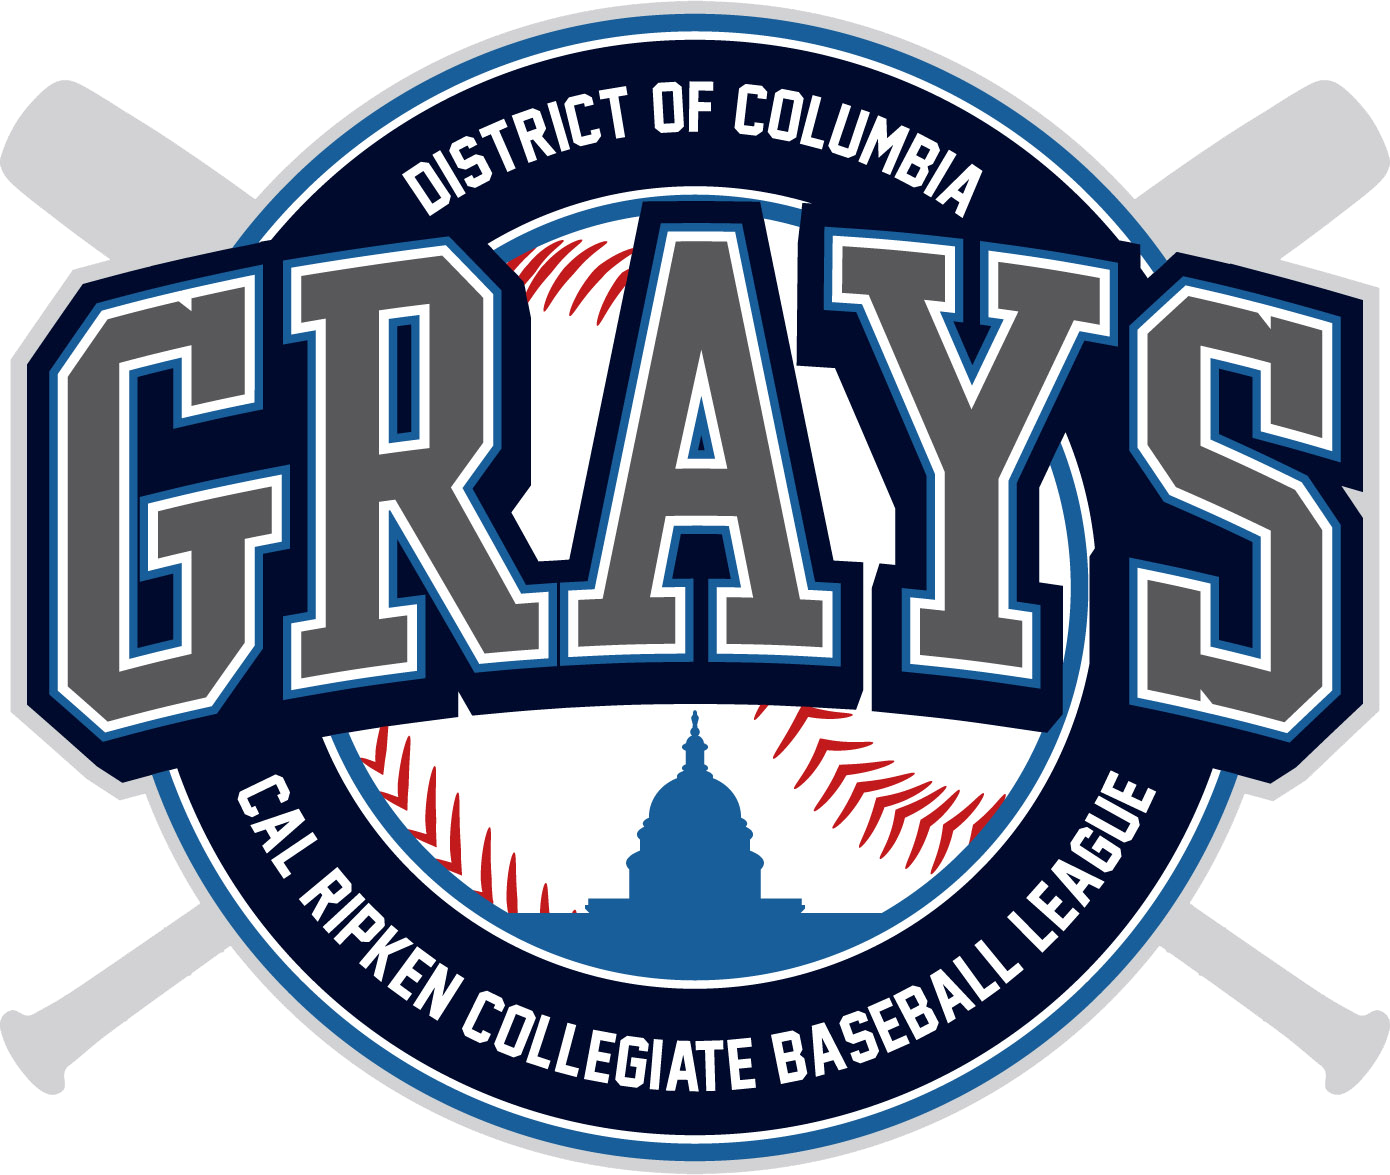 TPSS Brewers at Maury Wills Field DC, Stars and Strikes Tou…